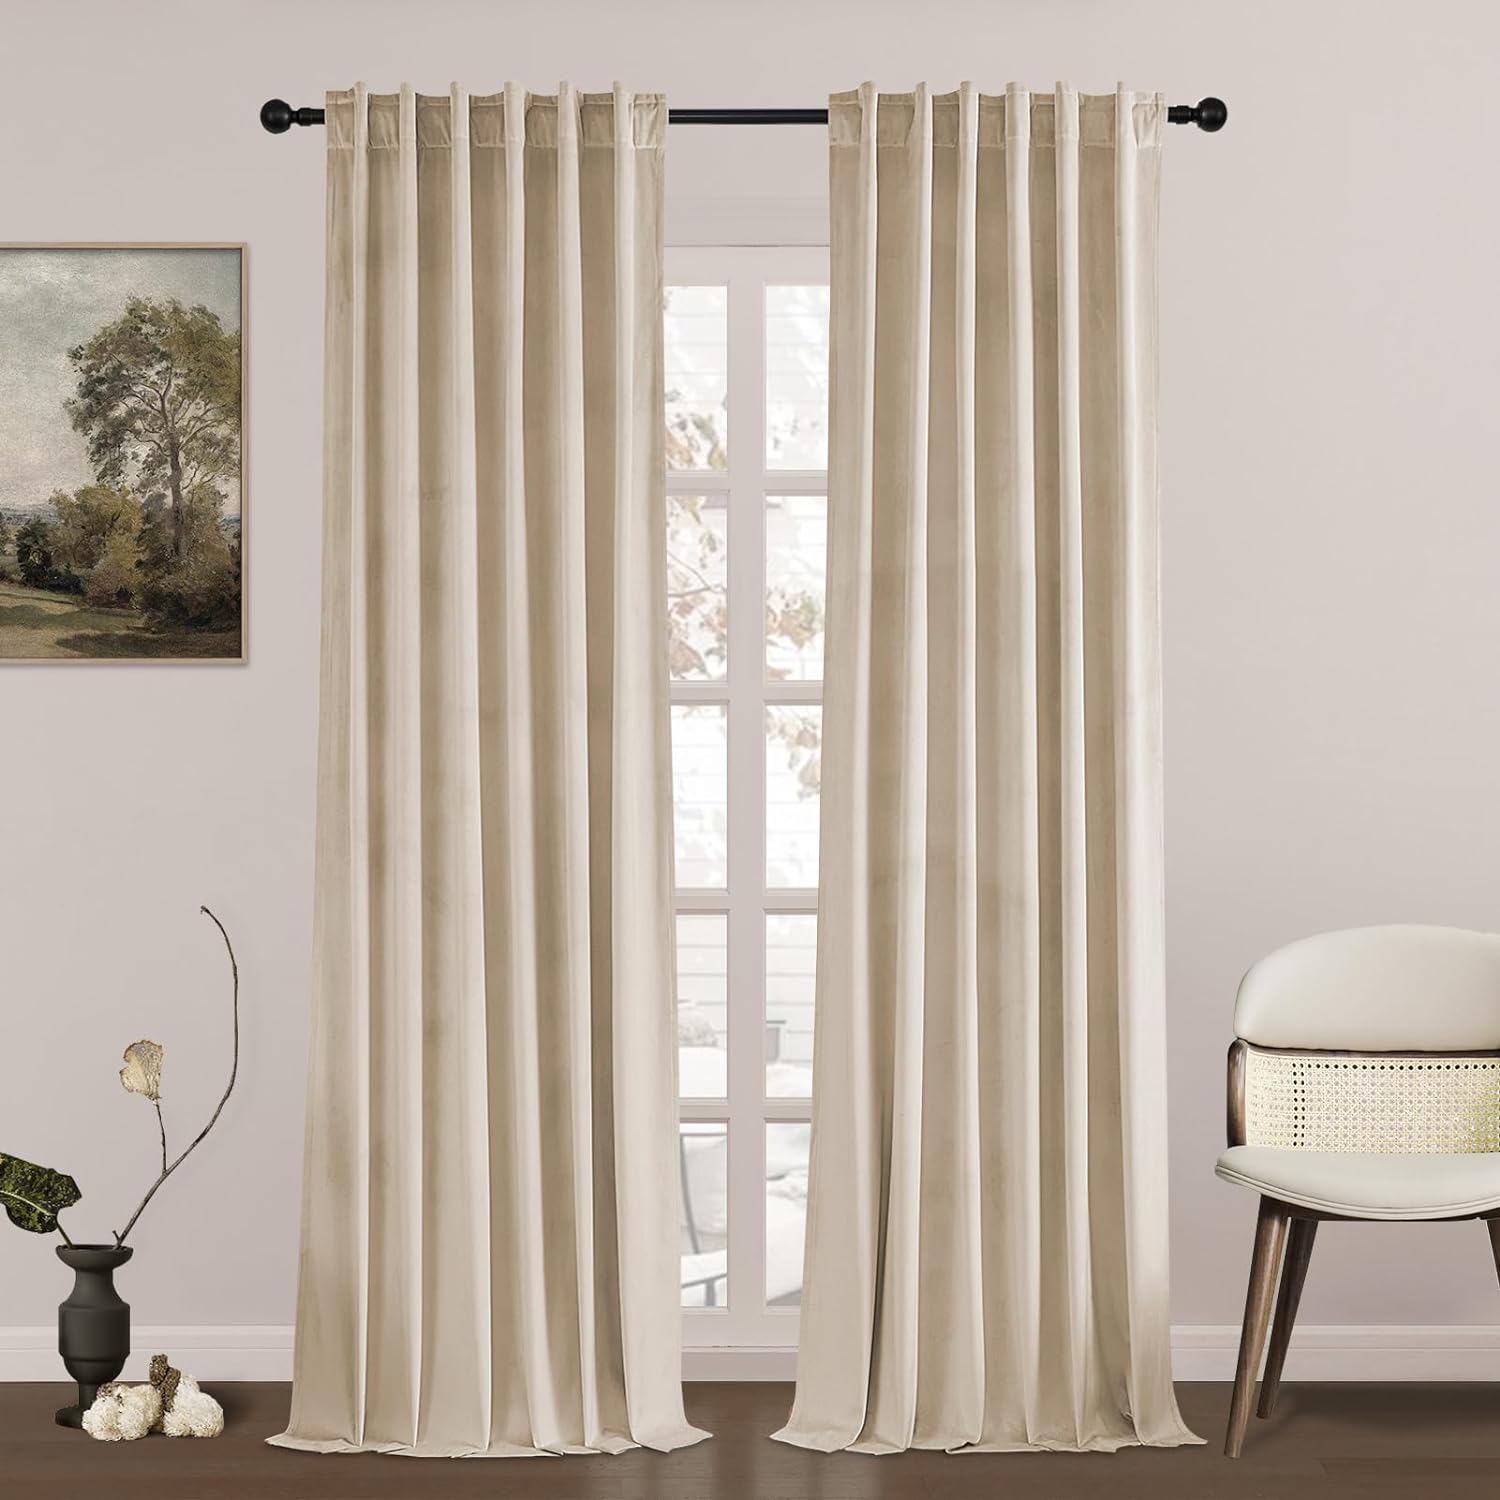 Topfinel Natural Blackout Velvet Curtains for Bedroom 108 Inches Length 2 Panels Set Thermal Insulated Noise Reducing Energy Saving Drapes for Living Room 108 Inches Long,9FT 2 Panels Burg,Beige